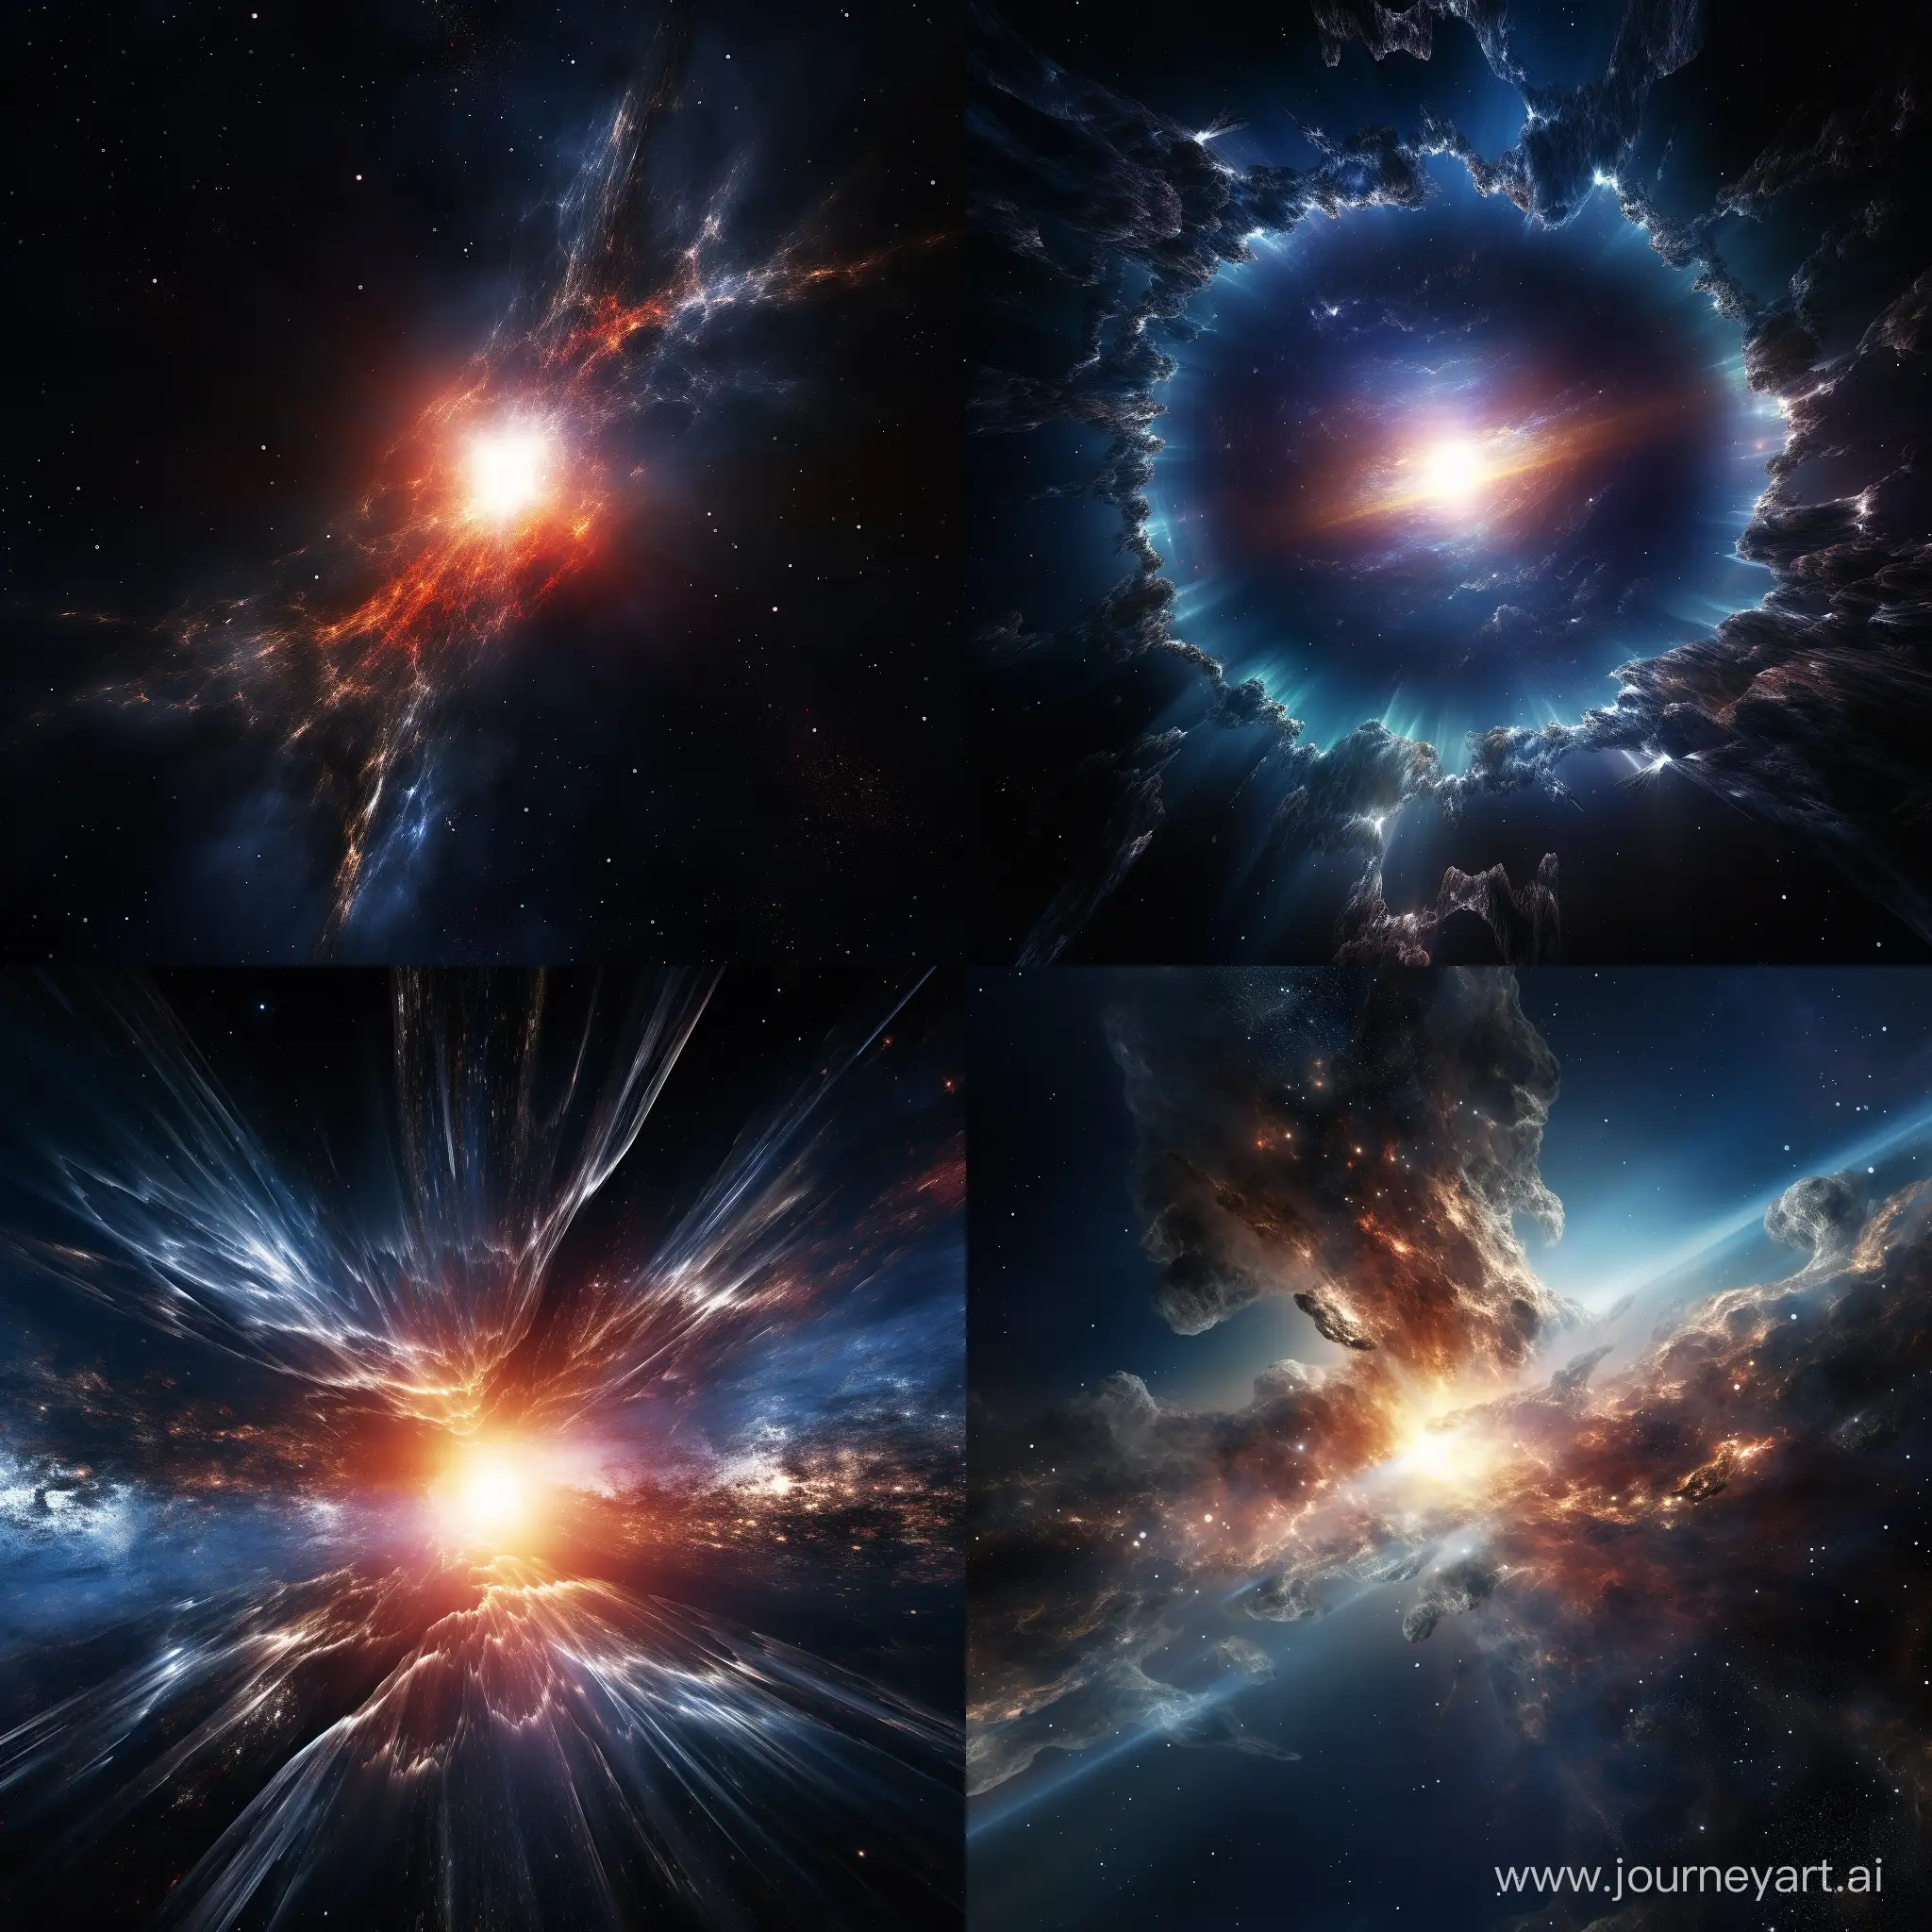 Realistic-Photograph-of-a-Shining-Quasar-Viewed-from-a-Spaceship